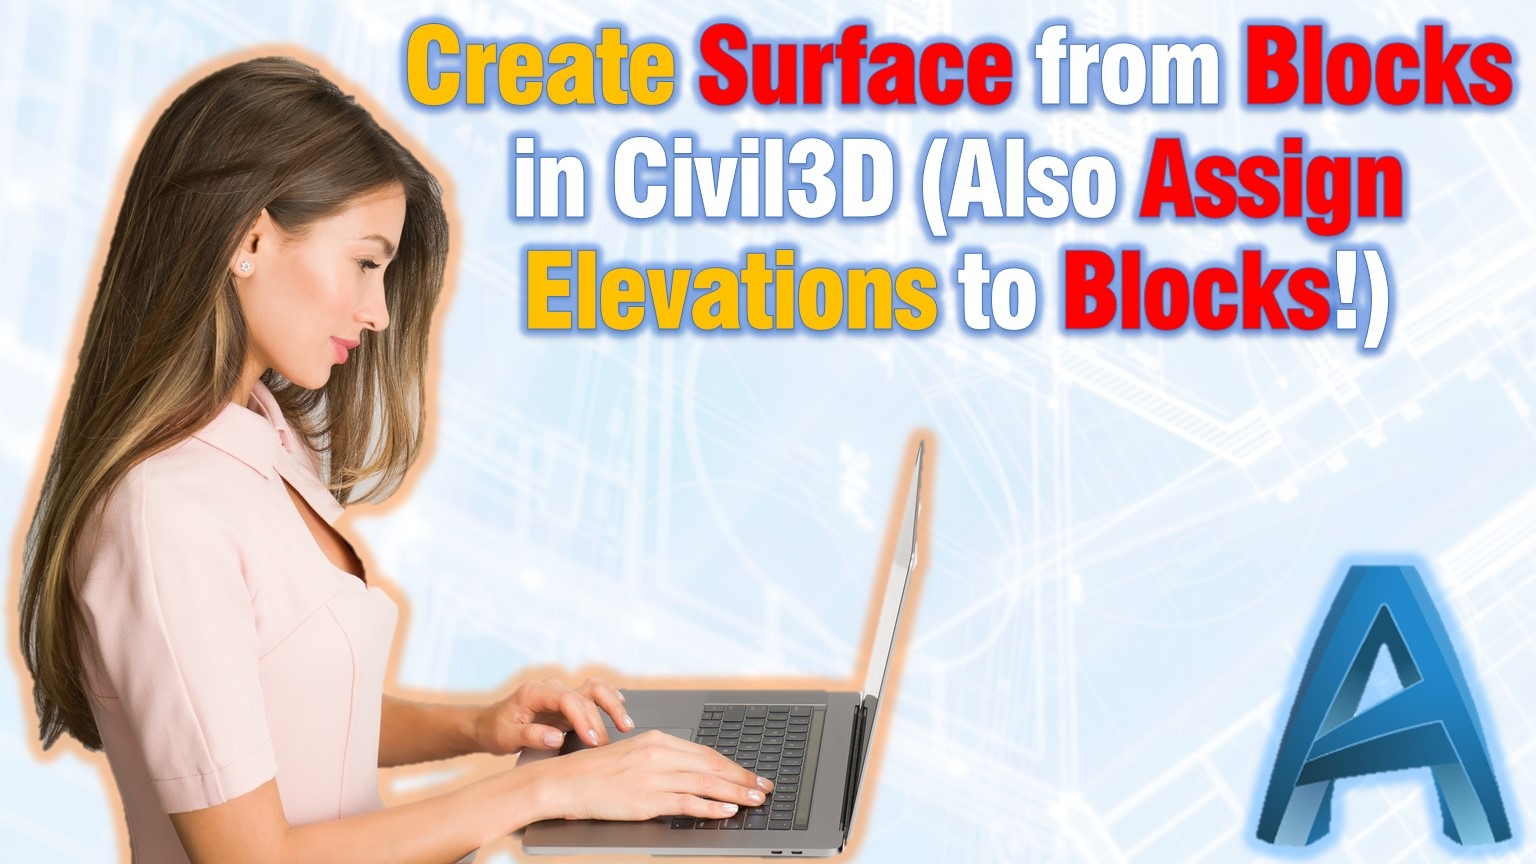 Learn how to Create Surface from Blocks in Civil 3D